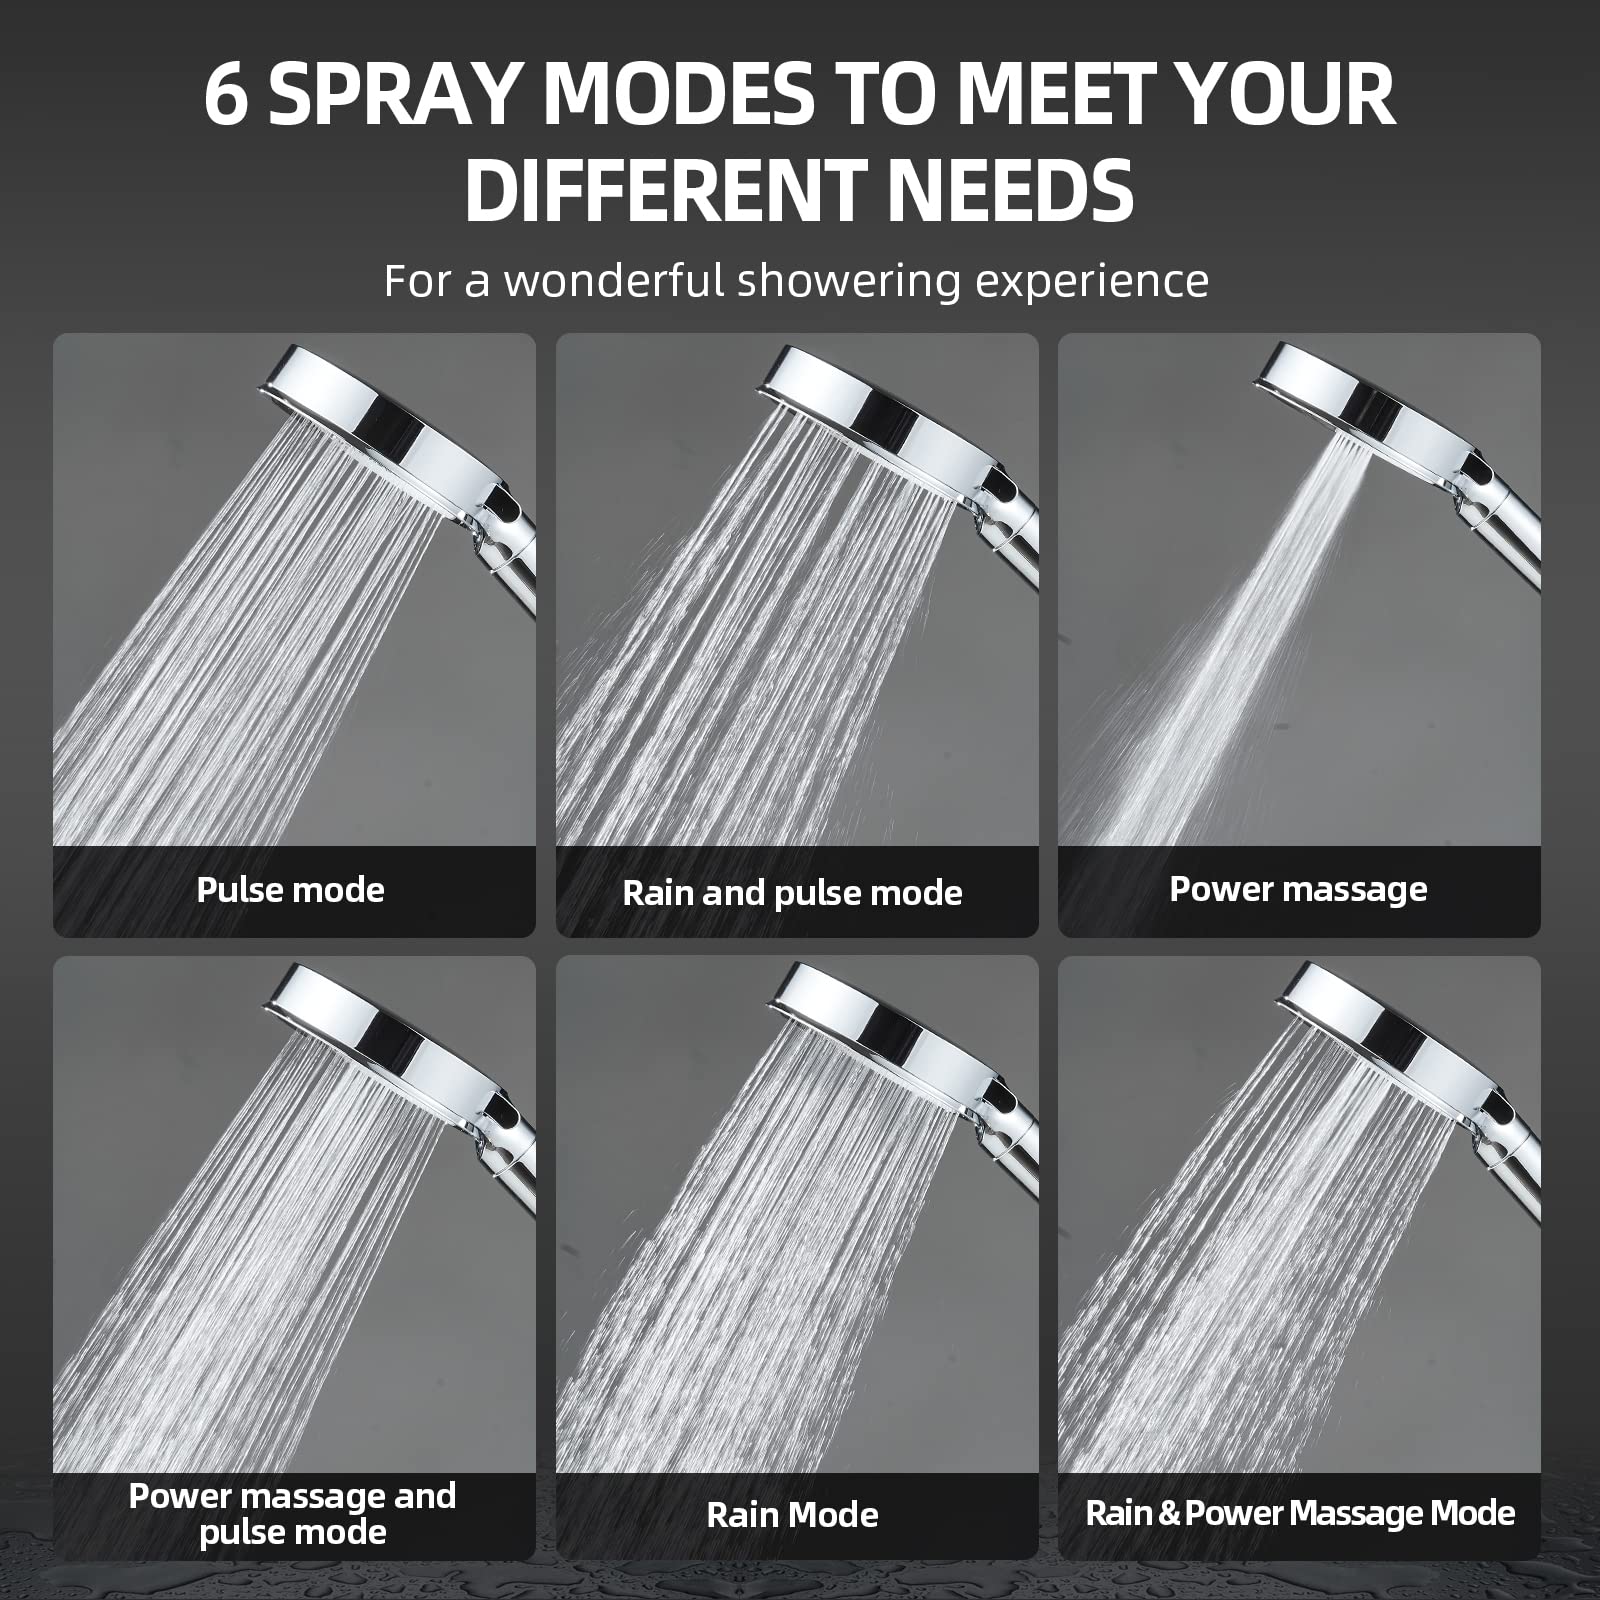 Cobbe Filtered Shower Head with Handheld, High Pressure 6 Spray Mode Showerhead with Filters, Water Softener Filters Beads for Hard Water - Remove Chlorine - Reduces Dry Itchy Skin, Chrome